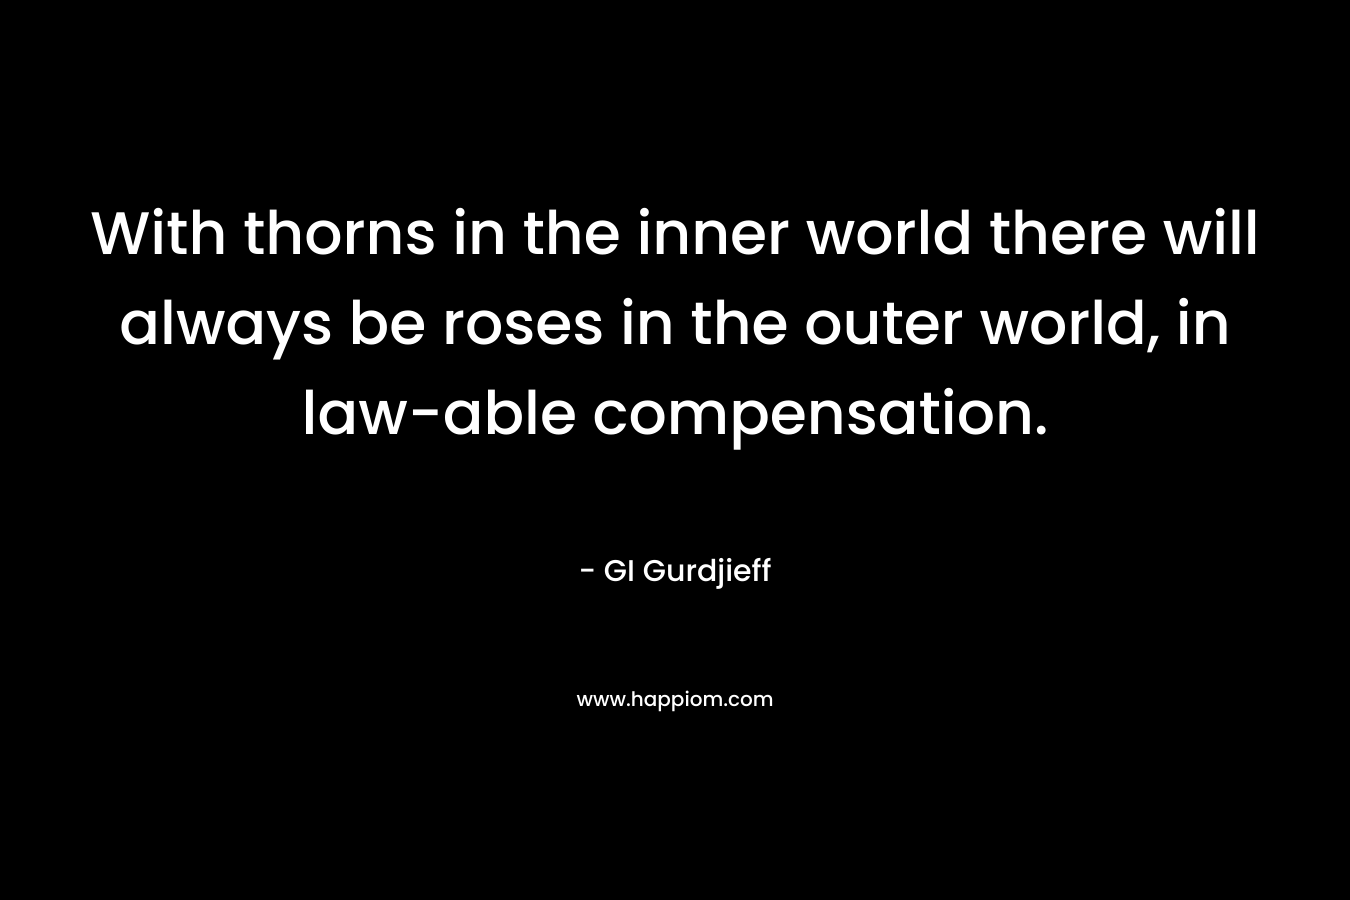 With thorns in the inner world there will always be roses in the outer world, in law-able compensation. – GI Gurdjieff